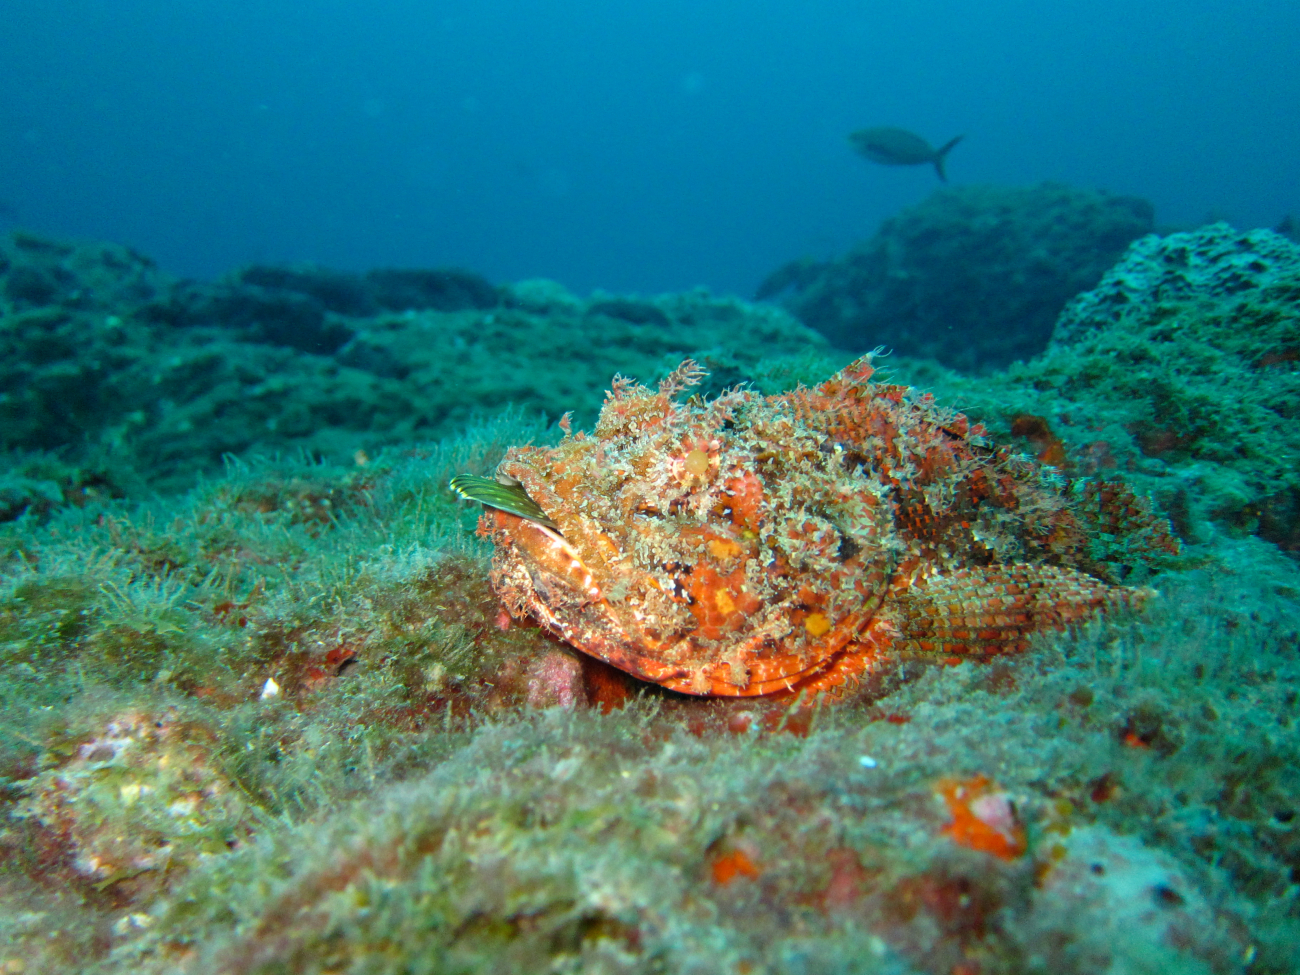 A spotted scorpionfish on the reef